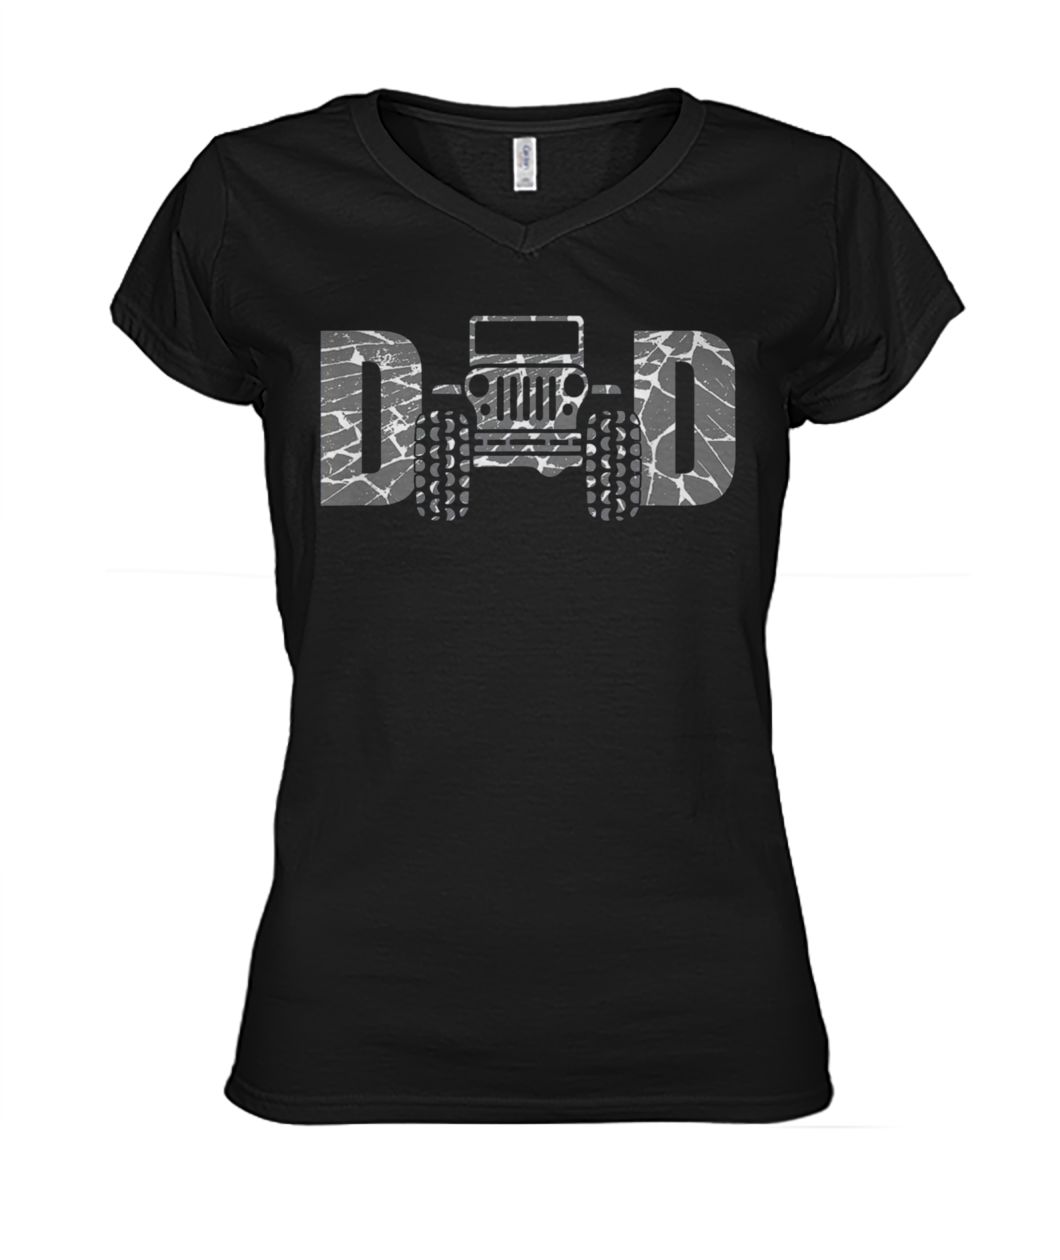 Jeep dad father's day women's v-neck